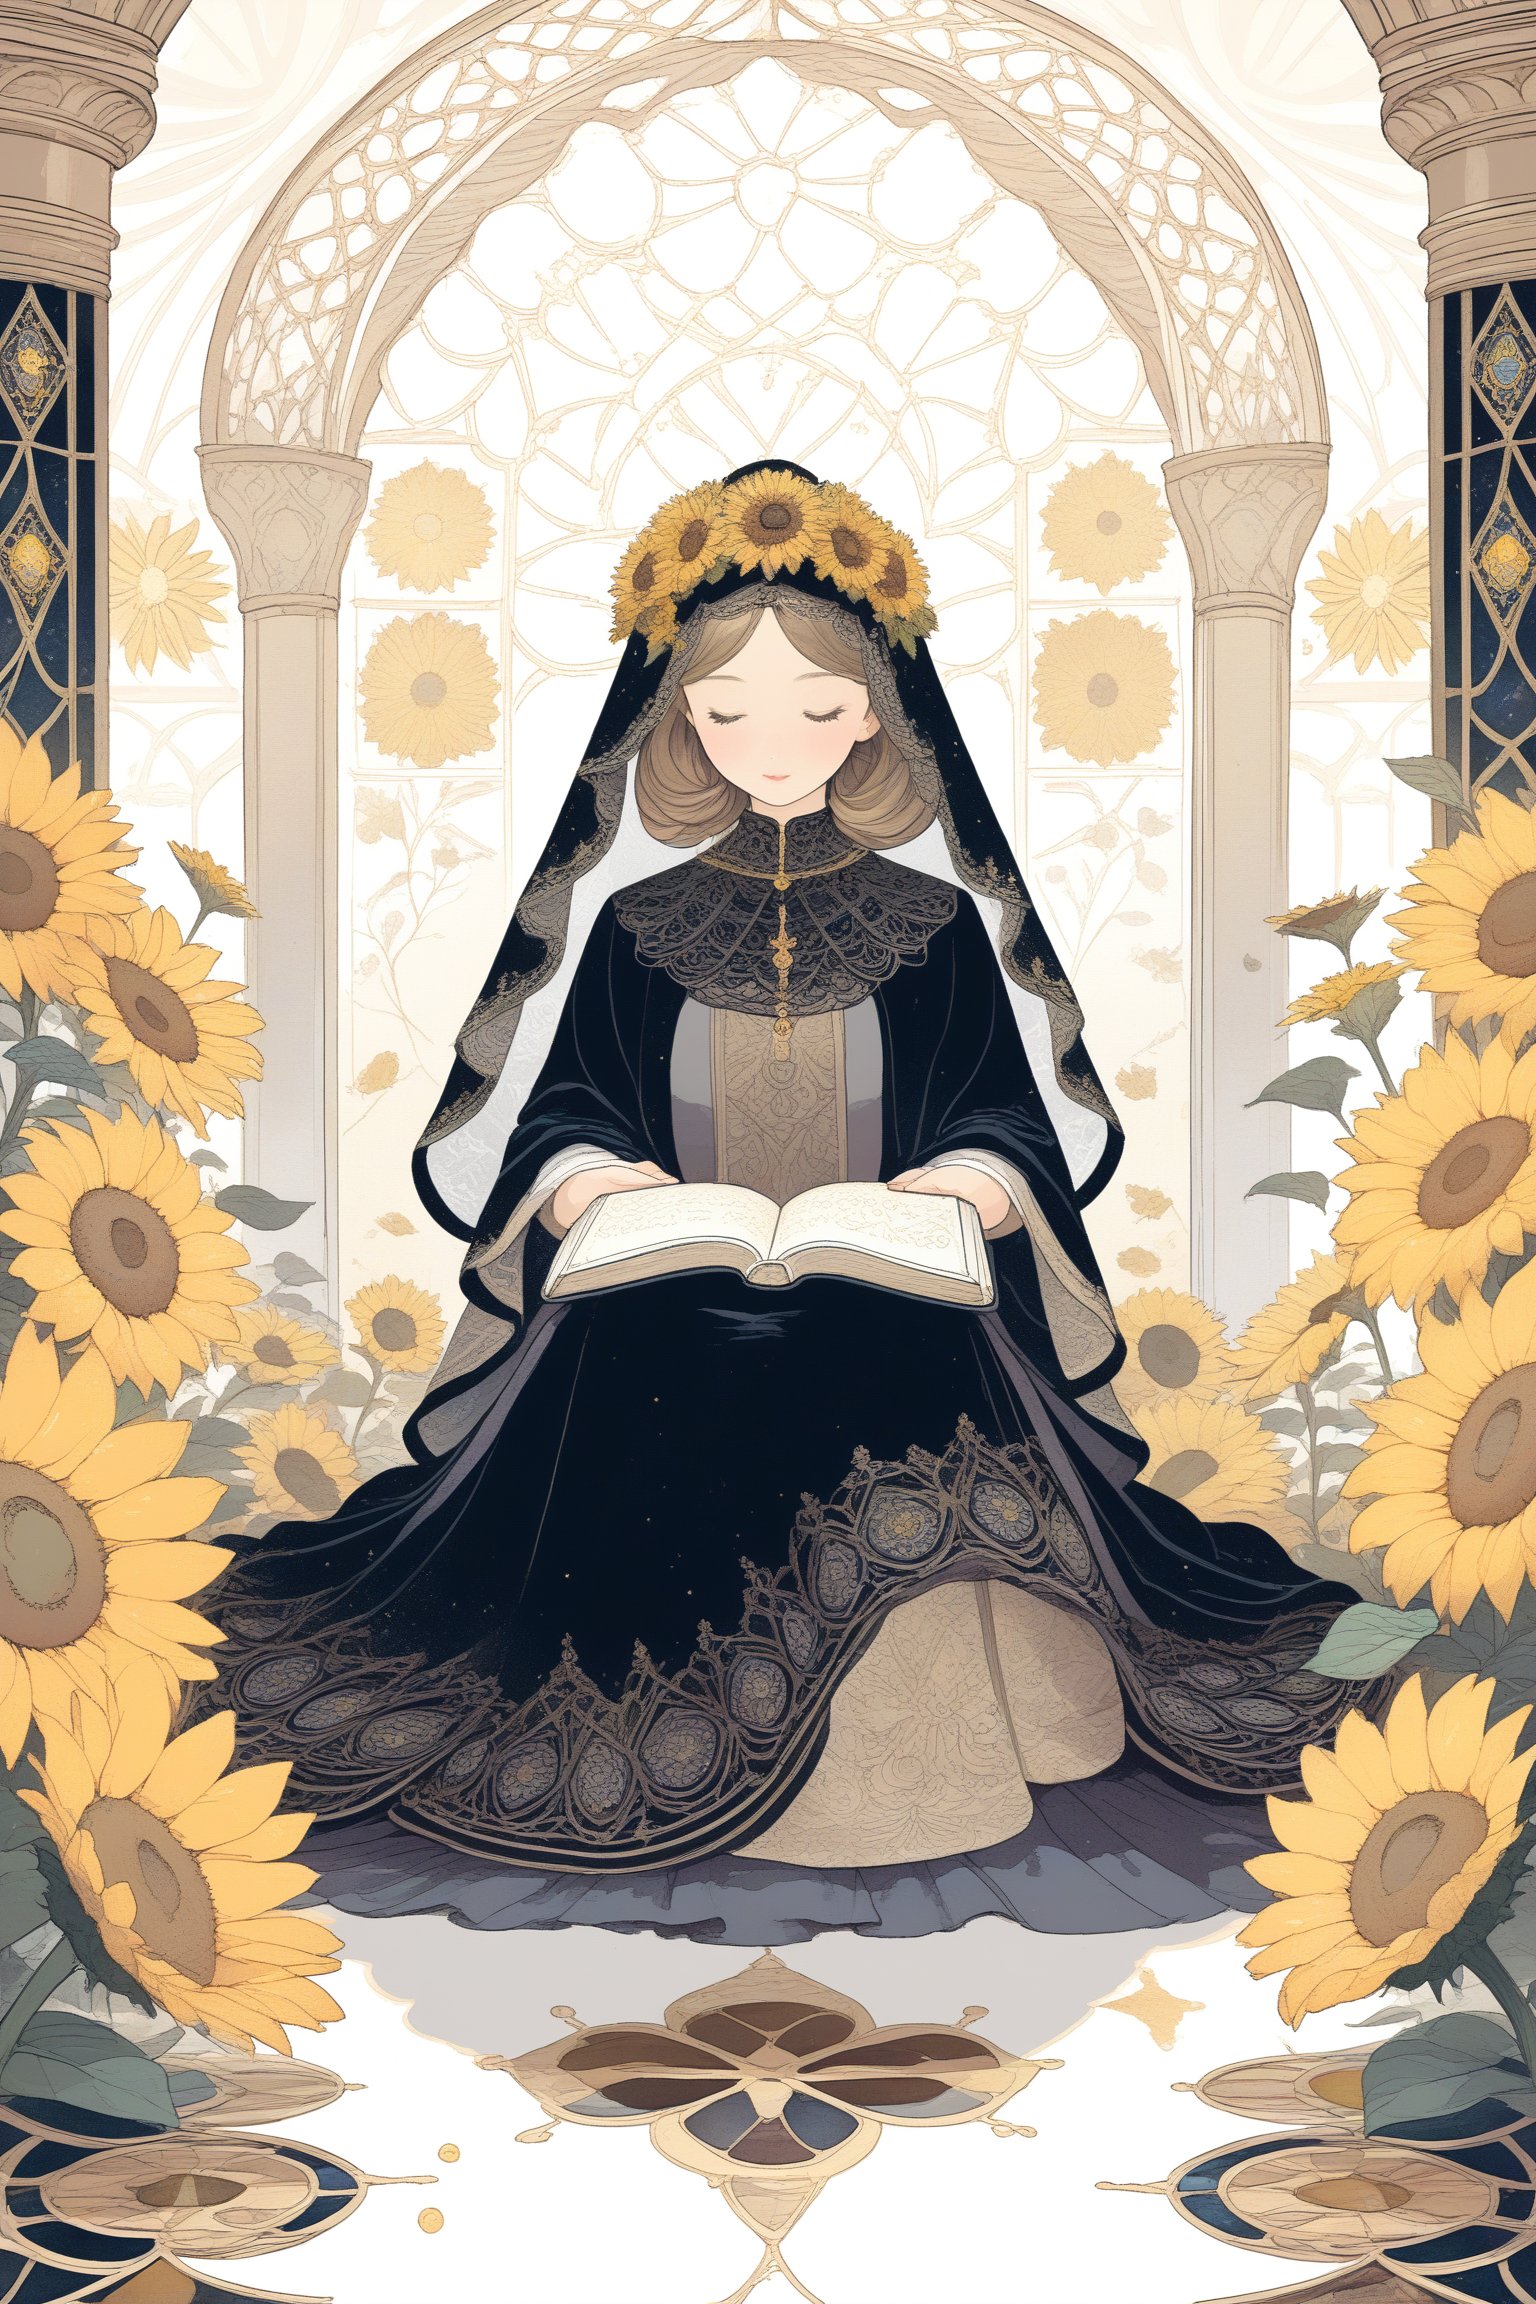 A woman sitting between two columns, with a veil behind her and a holy book on her lap, reflecting wisdom and mystery., fractal art (tarot card design), botanical illustration, sunflowers, classic and elegant flourish, Lofi art style , vintage, best quality, masterpiece, extremely detailed and intricate details,